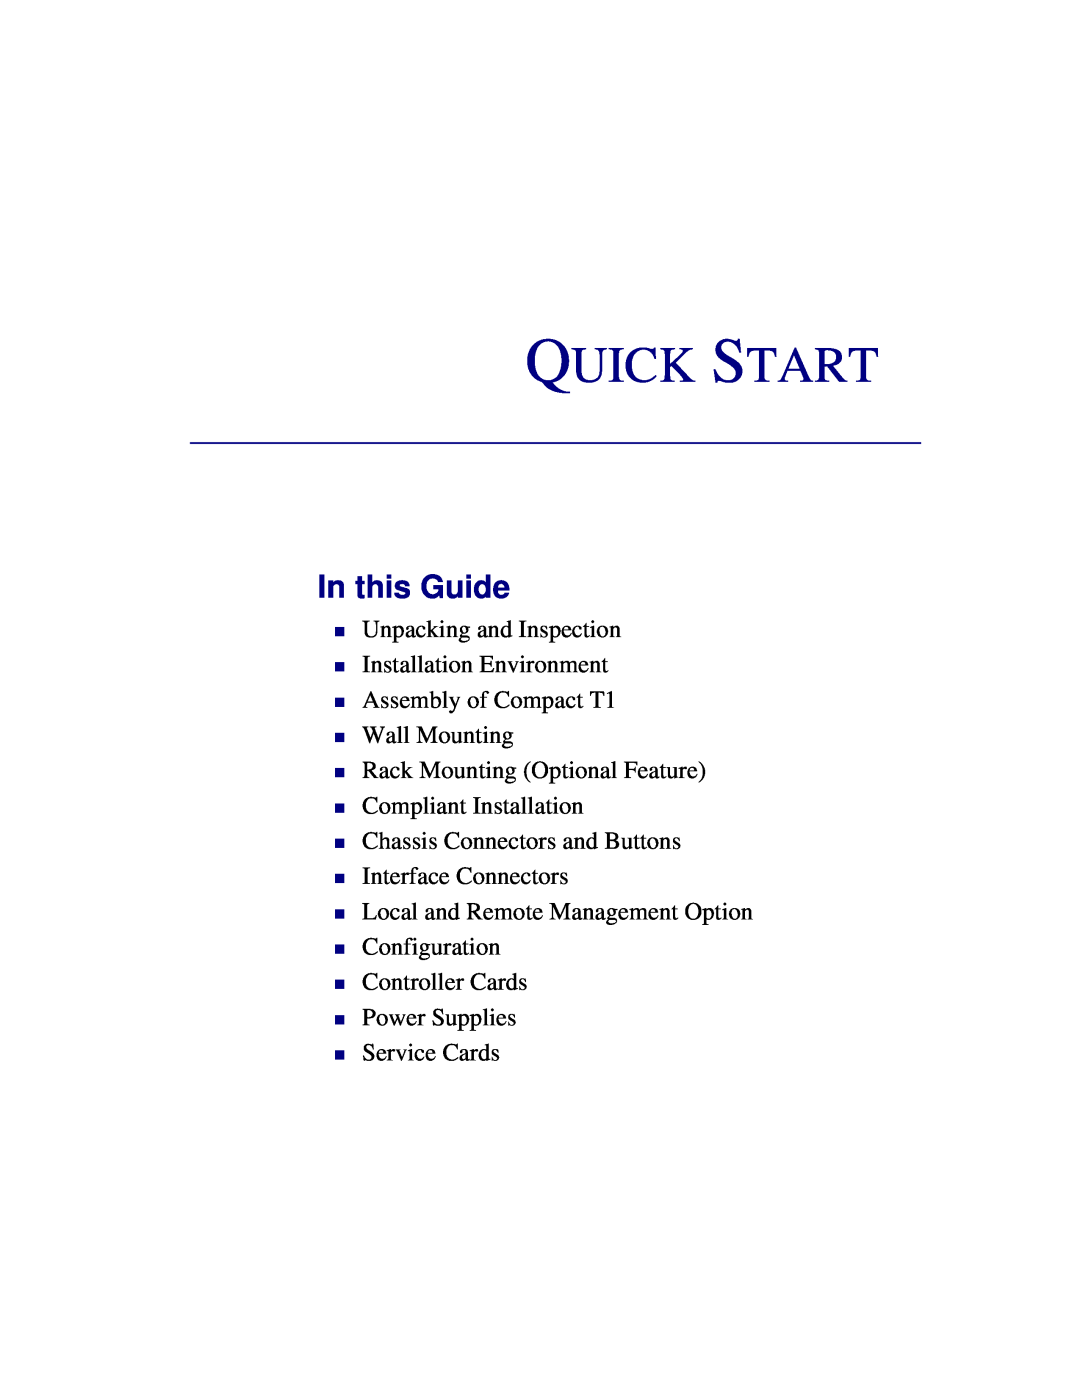 Black Box COMPACT T1 quick start Quick Start, In this Guide, ν Unpacking and Inspection ν Installation Environment 